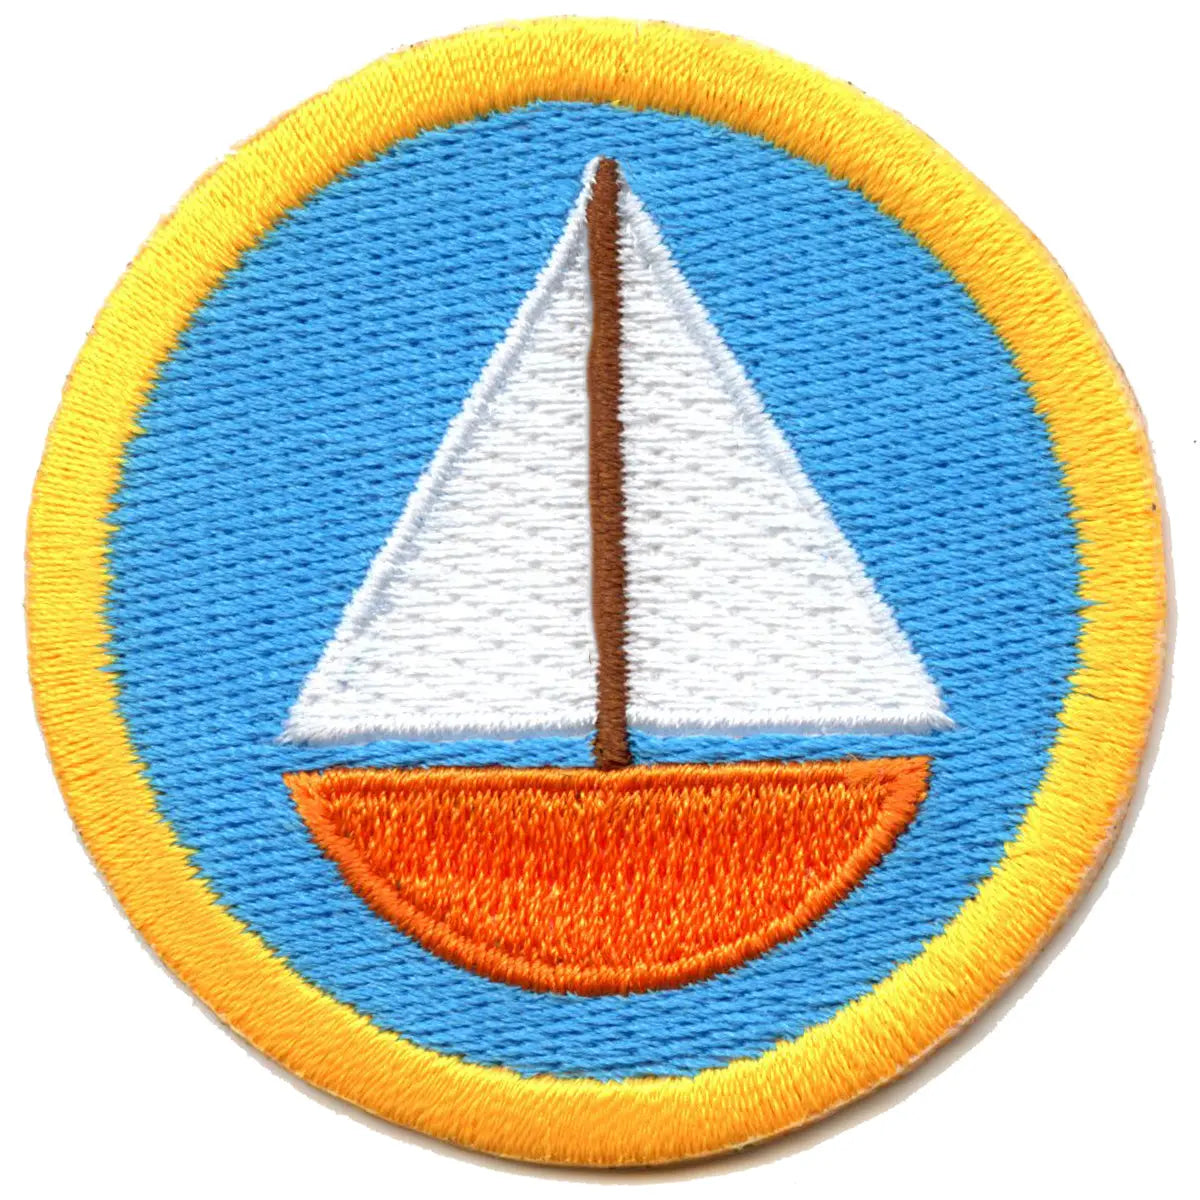 Boy Scout Badge 'Medical' Embroidered Velcro Patch